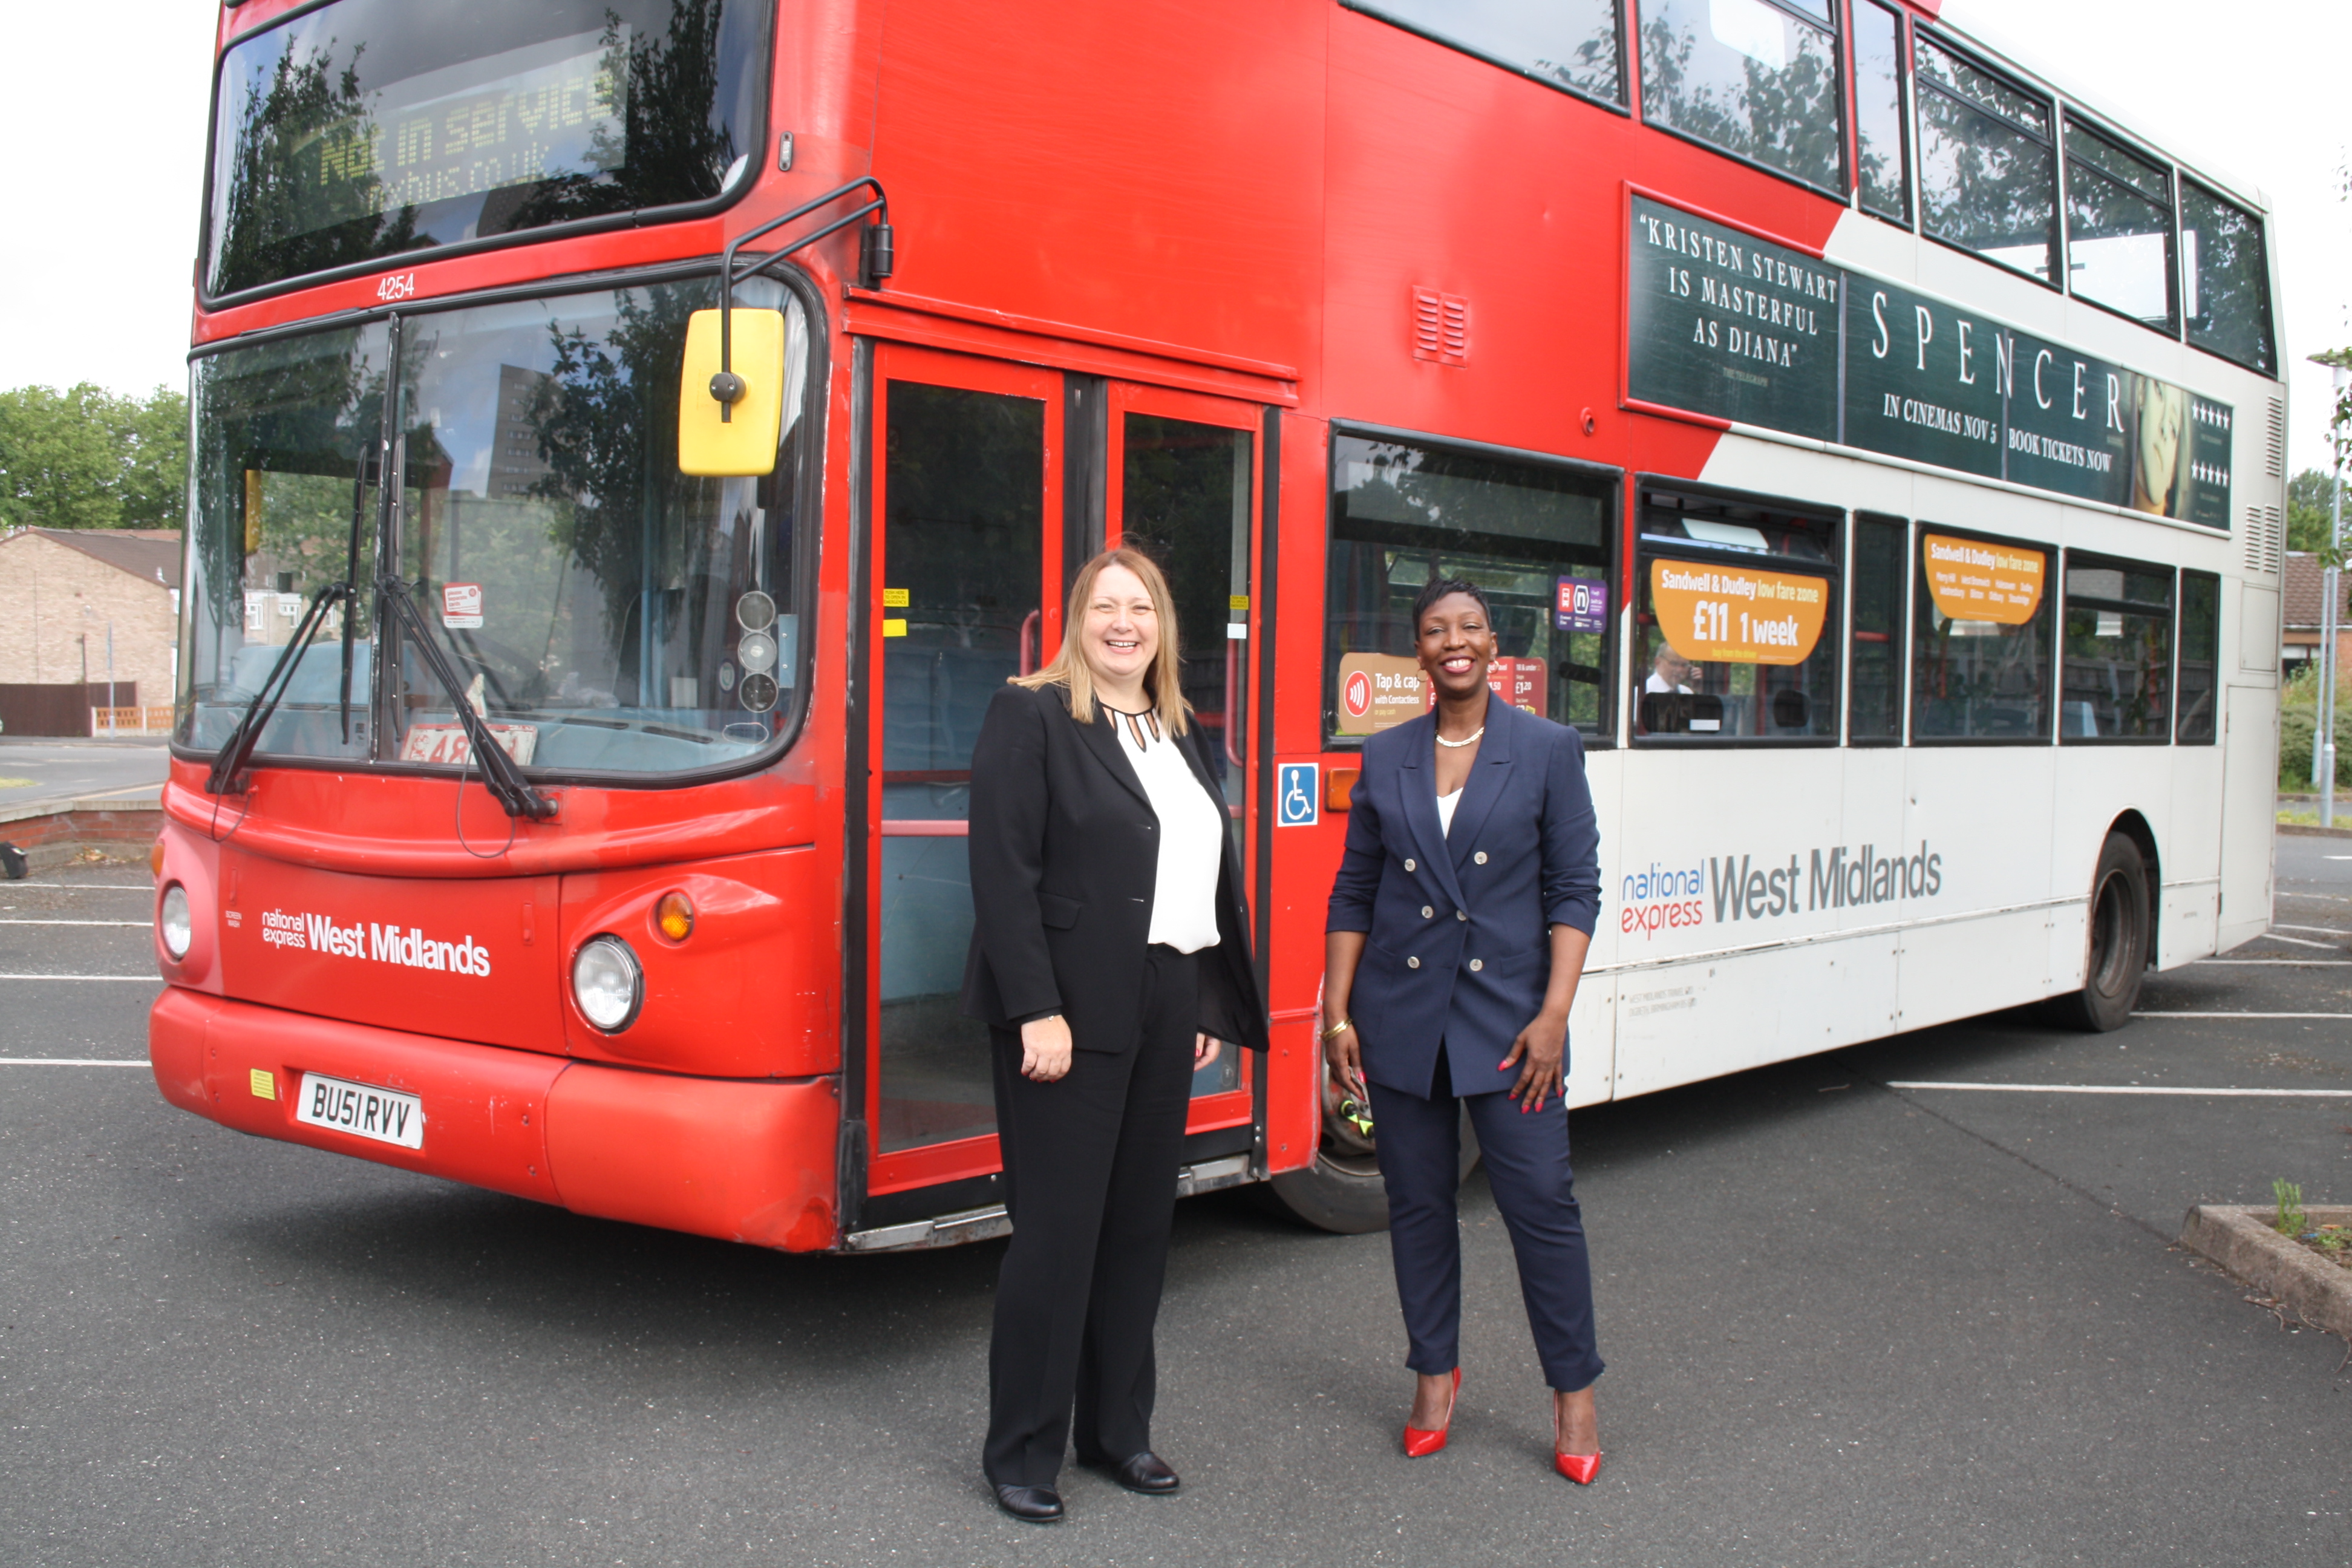 Rachel James and Patricia White - Suited for Success